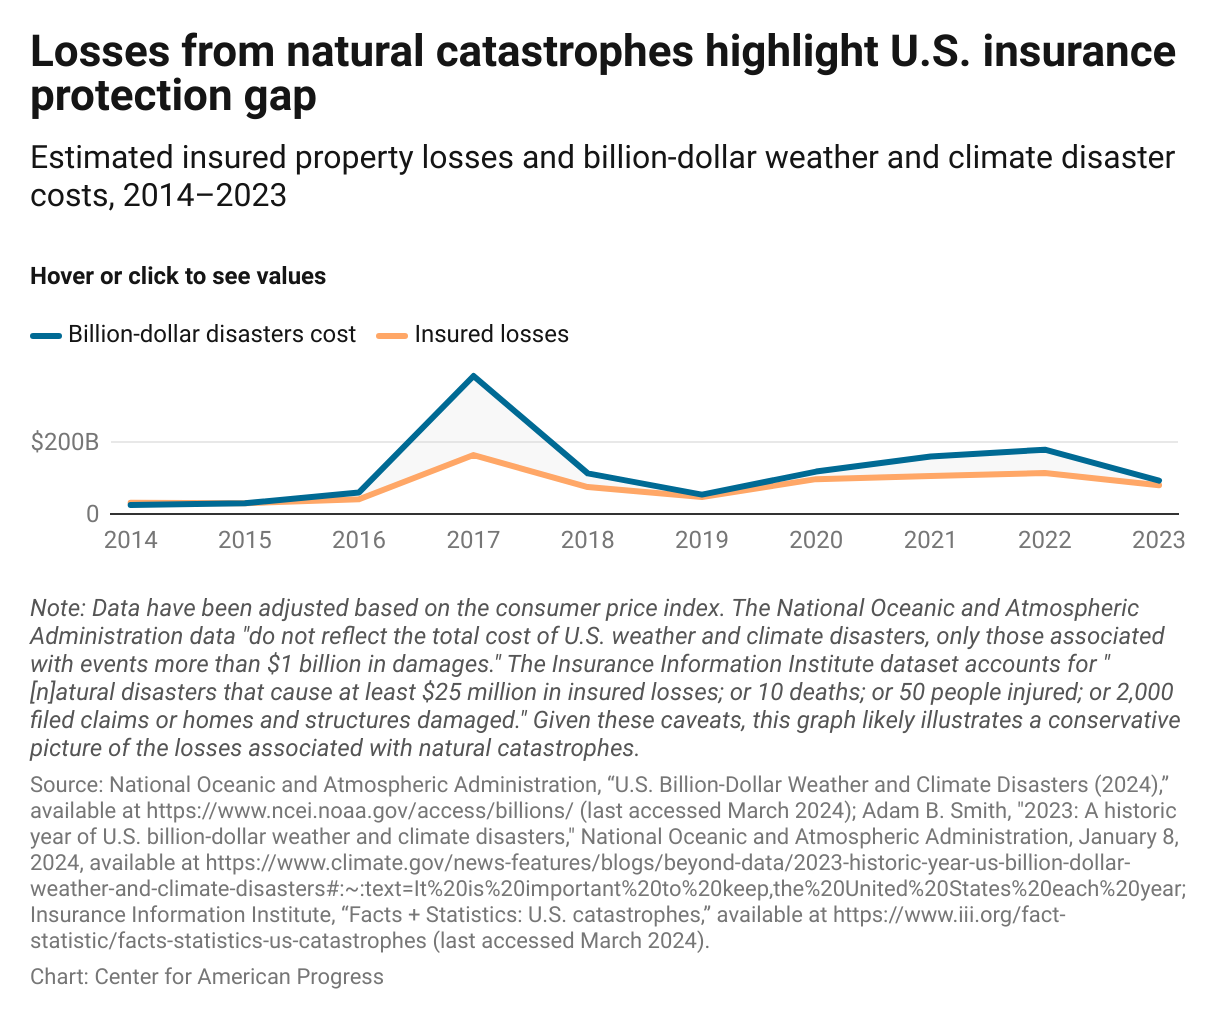 Graph showing billions of dollars in costs from climate and weather events and property losses from natural catastrophes over the past decade.